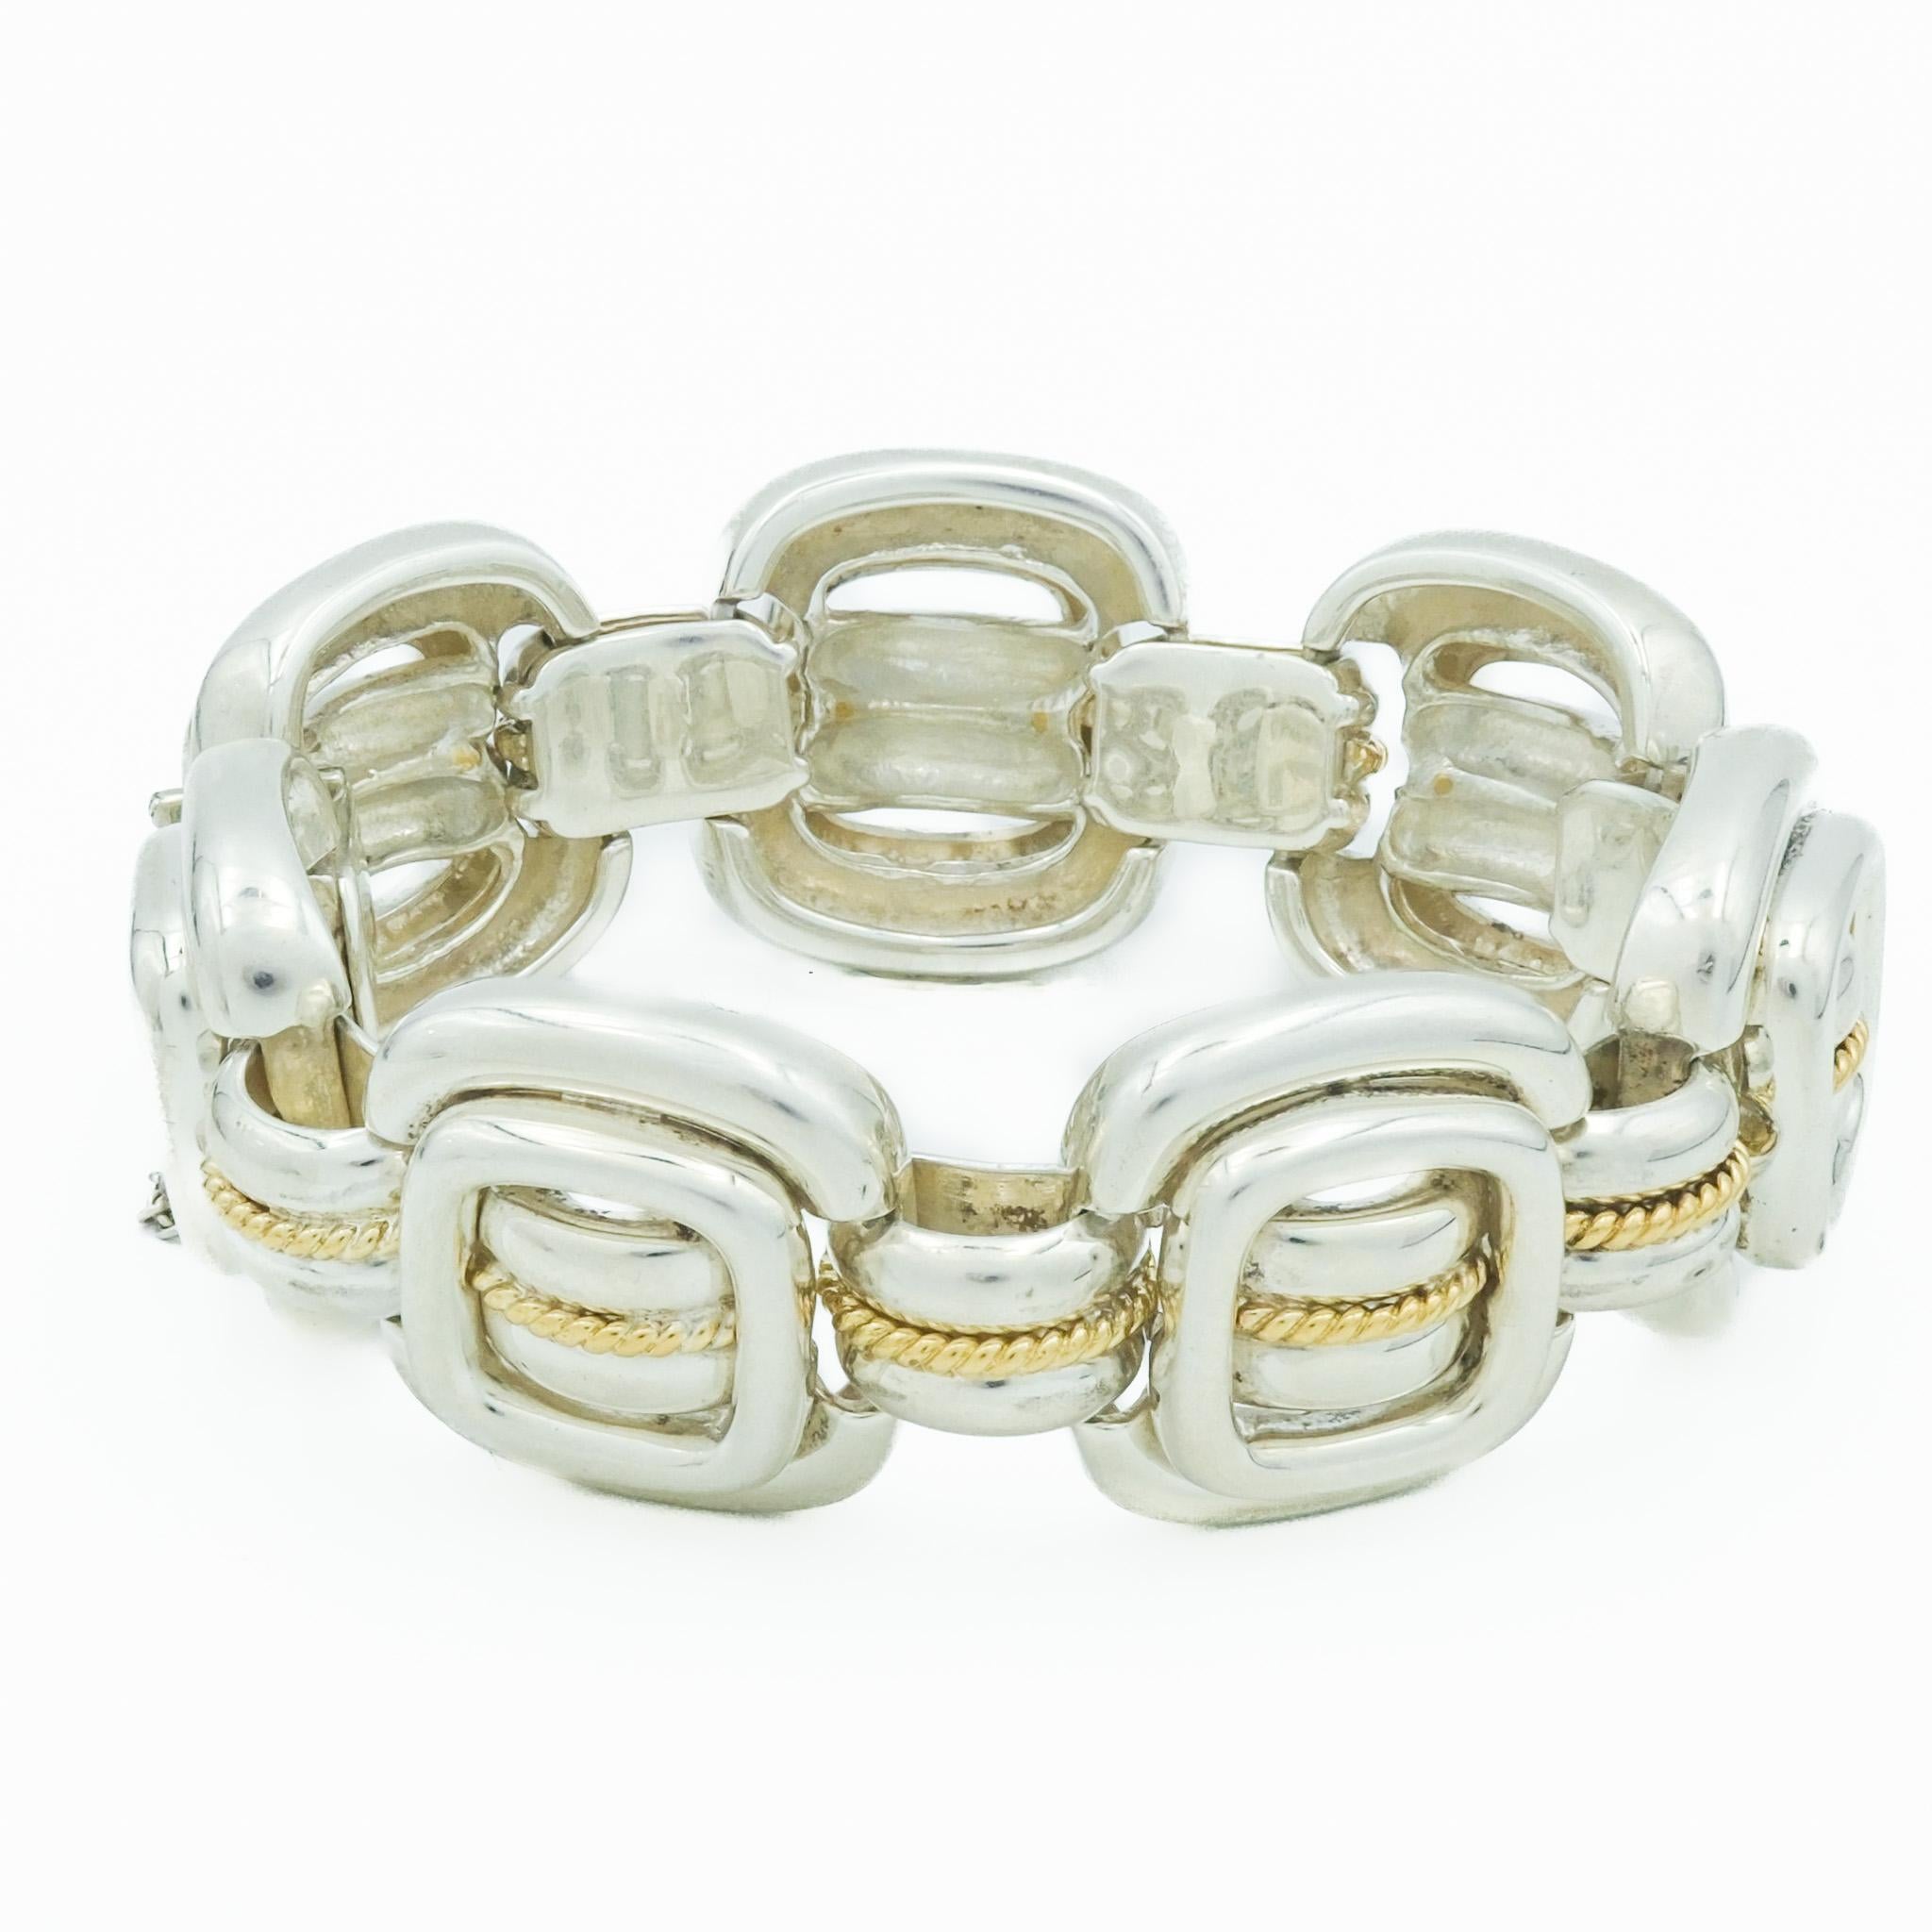 This distinctive sterling silver and gold bracelet from Tiffany & Co., crafted during the 1980s, reflects a period renowned for bold and luxurious jewelry designs. The bracelet features interlocking links that blend polished sterling silver with